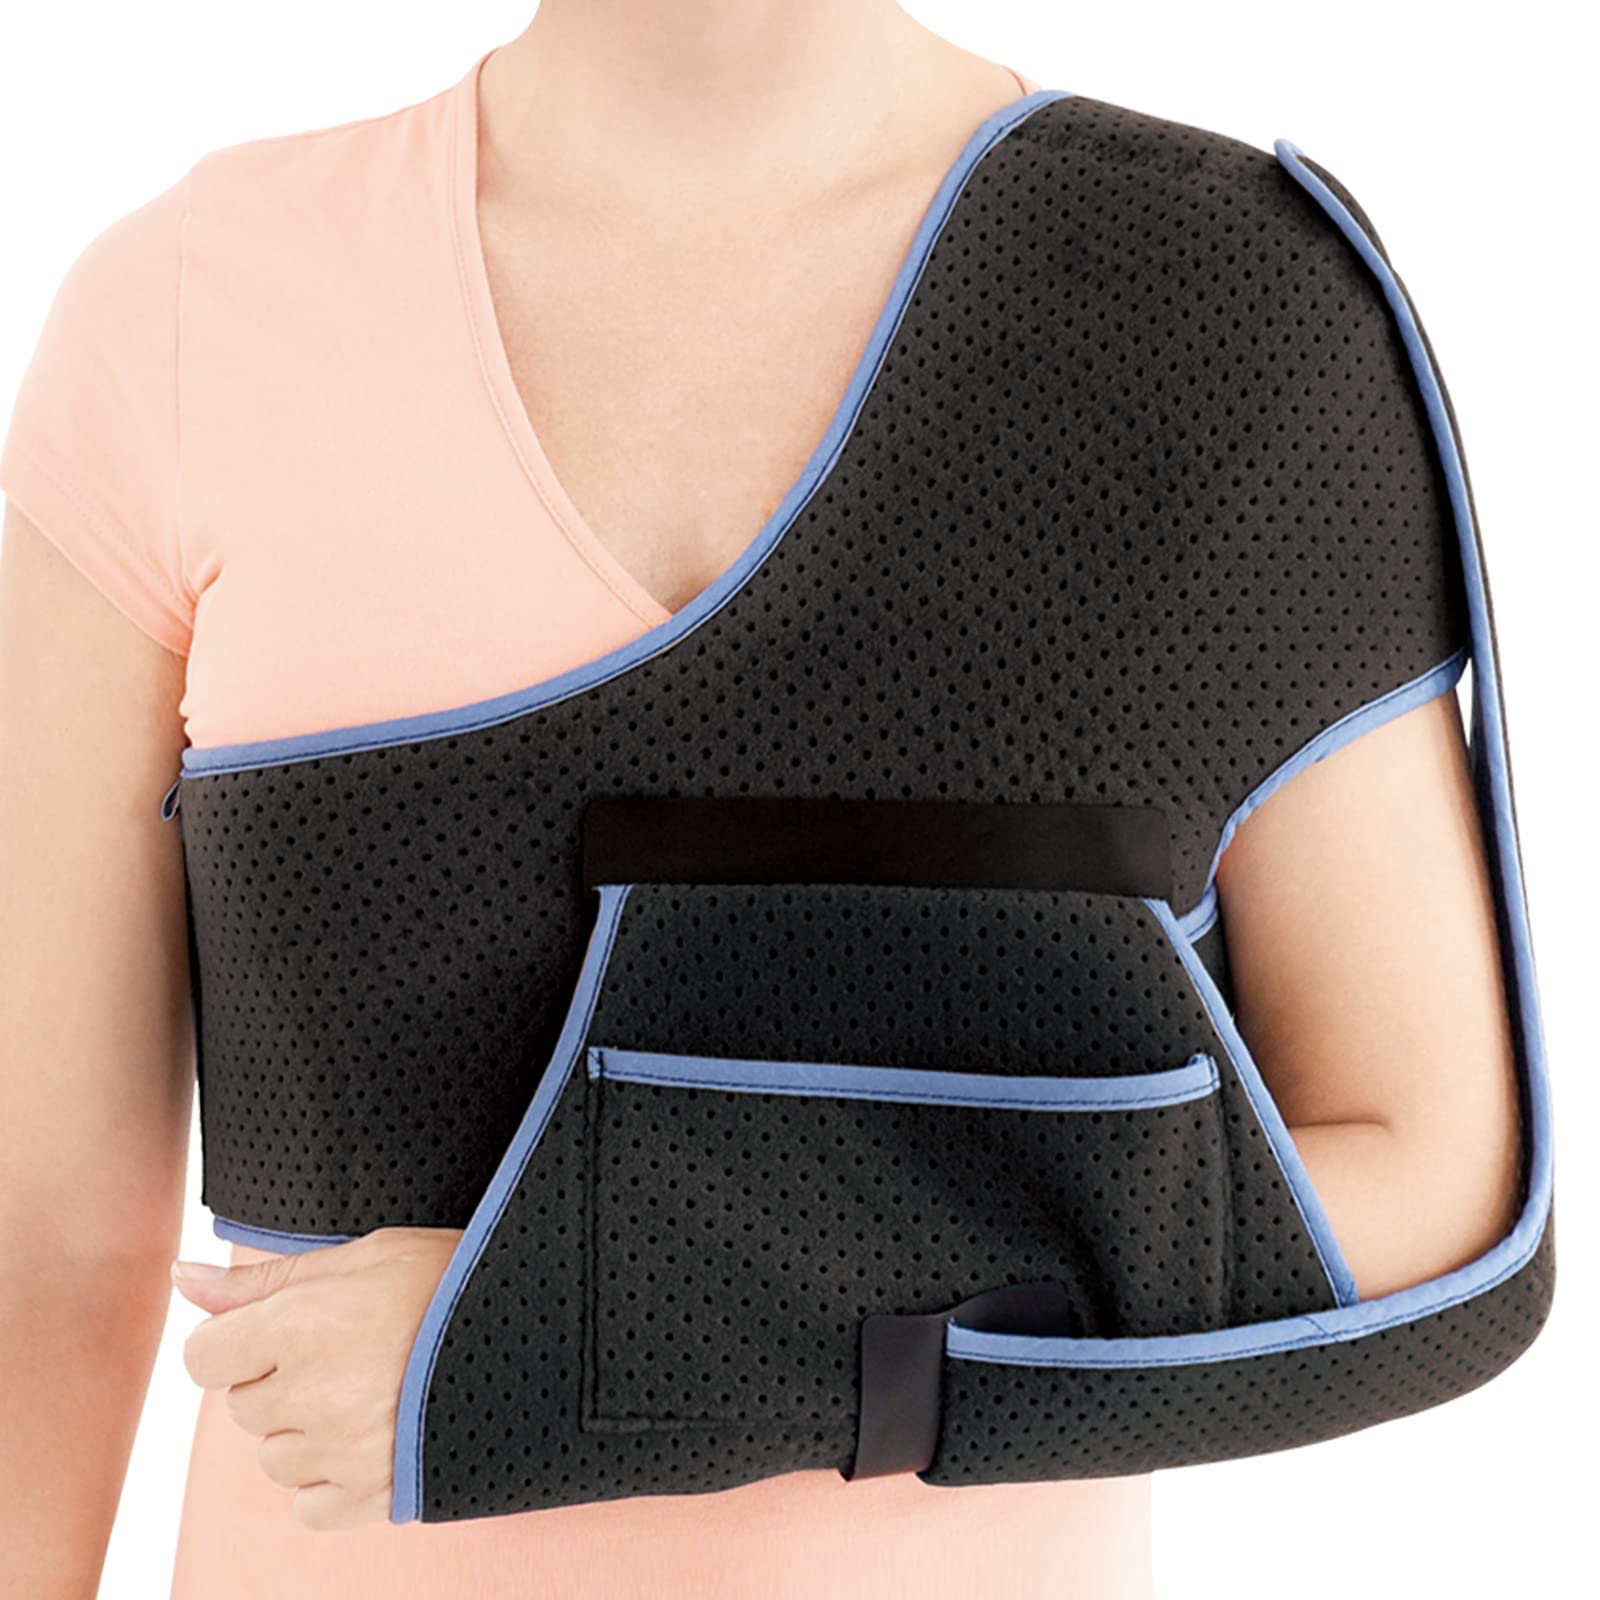 VELPEAU Arm Sling Shoulder Brace for Men Women - Immobilizer for Injury  Support Pain Relief for AC